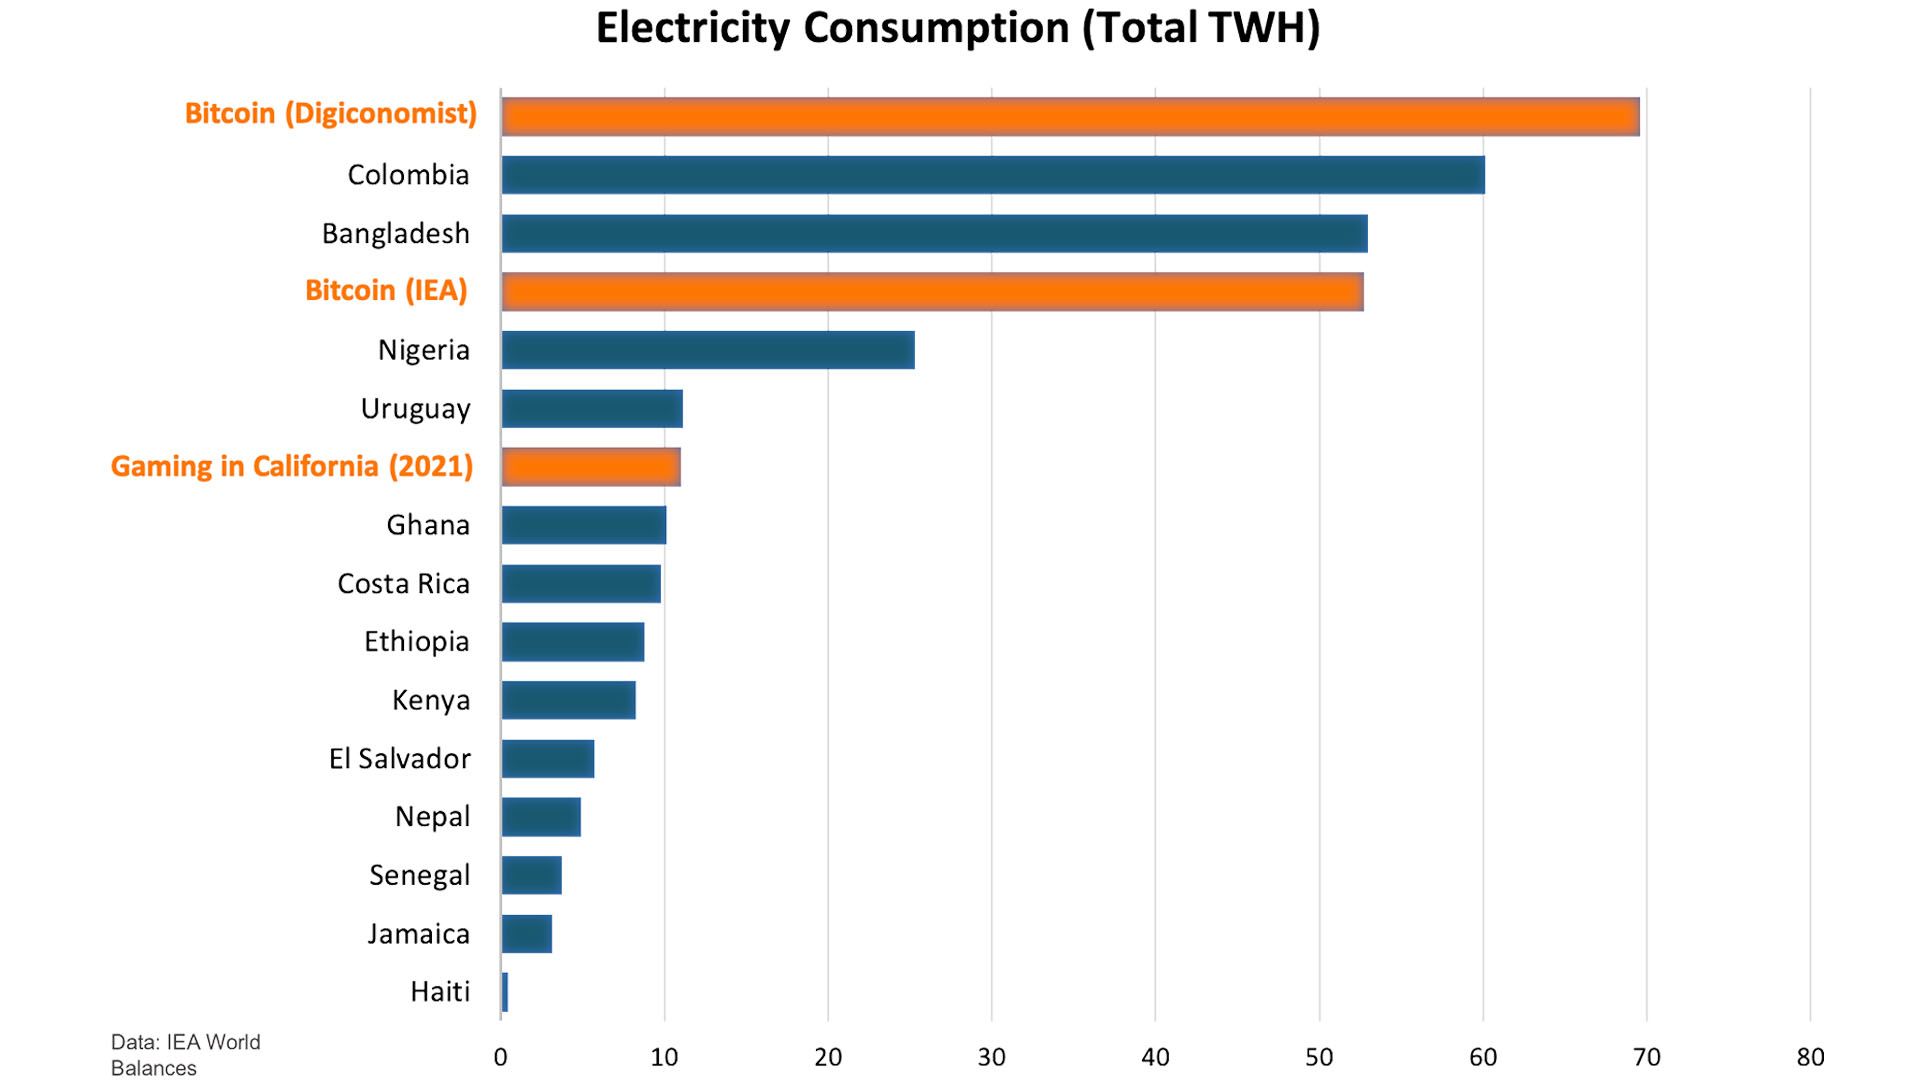 Chart comparing energy consumption of Bitcoin to several nations.